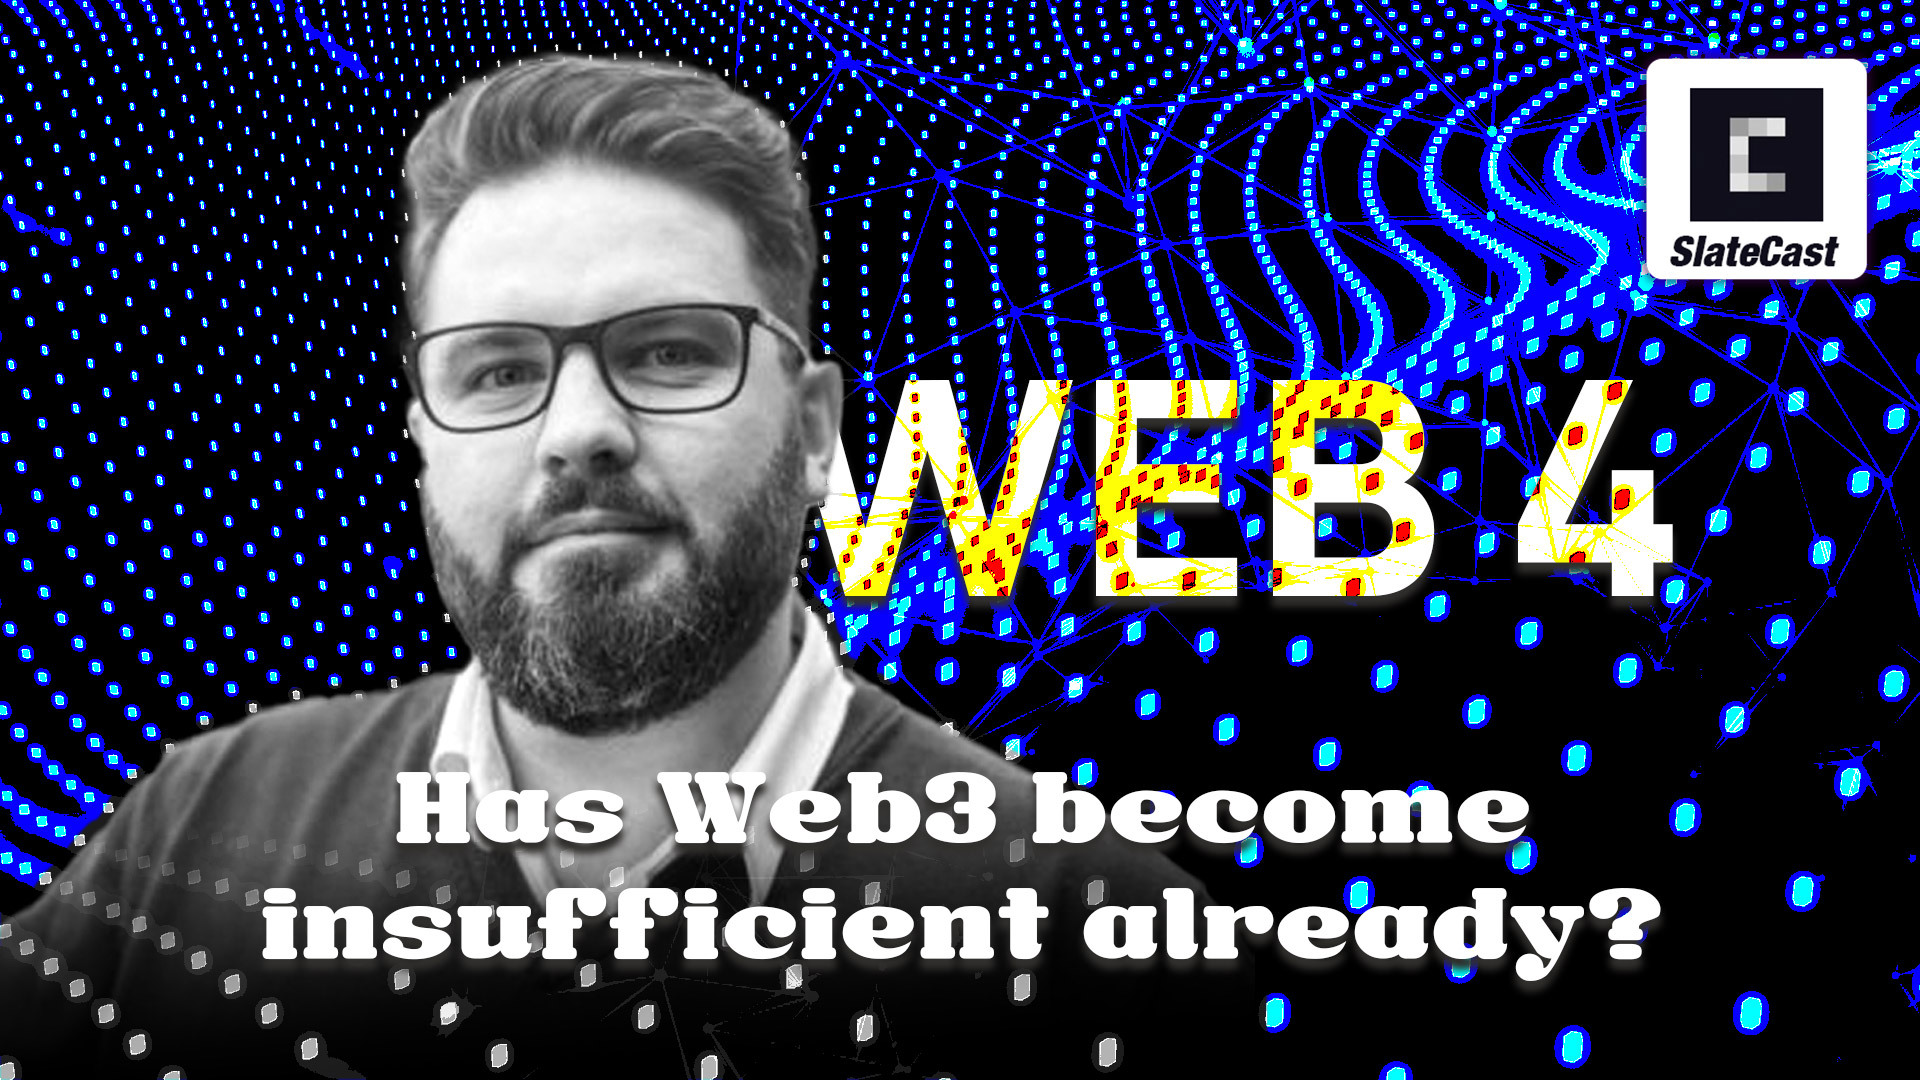 Has web3 failed in its vision? CoDeTech thinks so & the solution is Core Blockchain – SlateCast #24